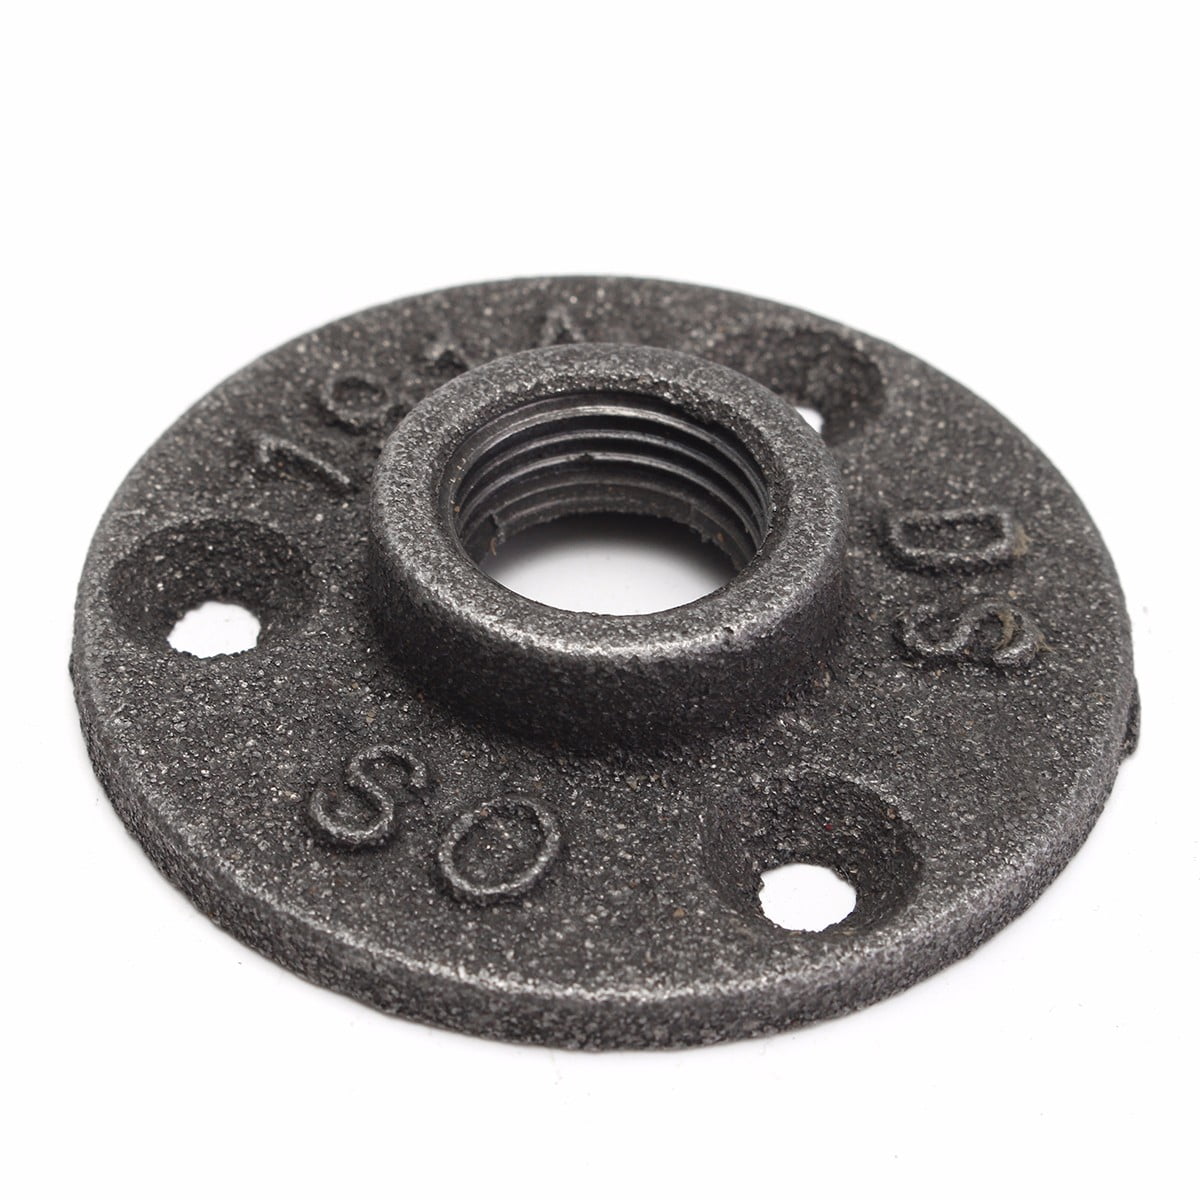 1/2" 3/4" 1" Black Malleable Cast Iron Pipe Fittings Floor Flange Threaded Hole 